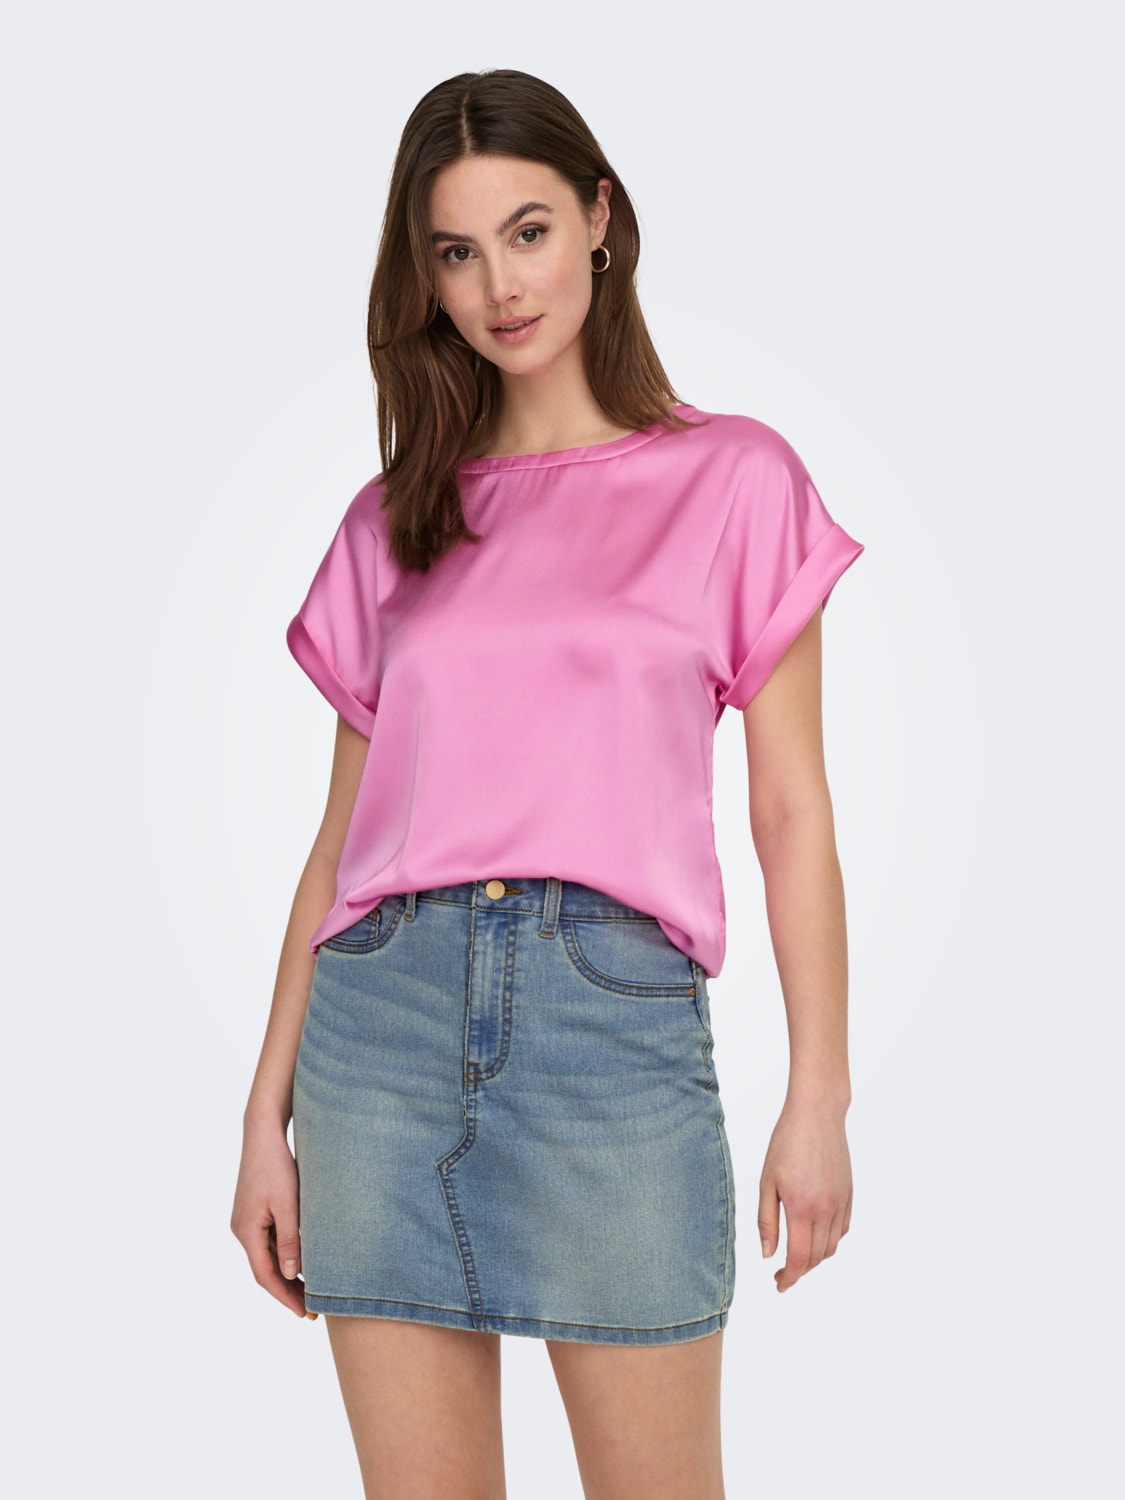 ONLY o-neck top -Fuchsia Pink - 15304077